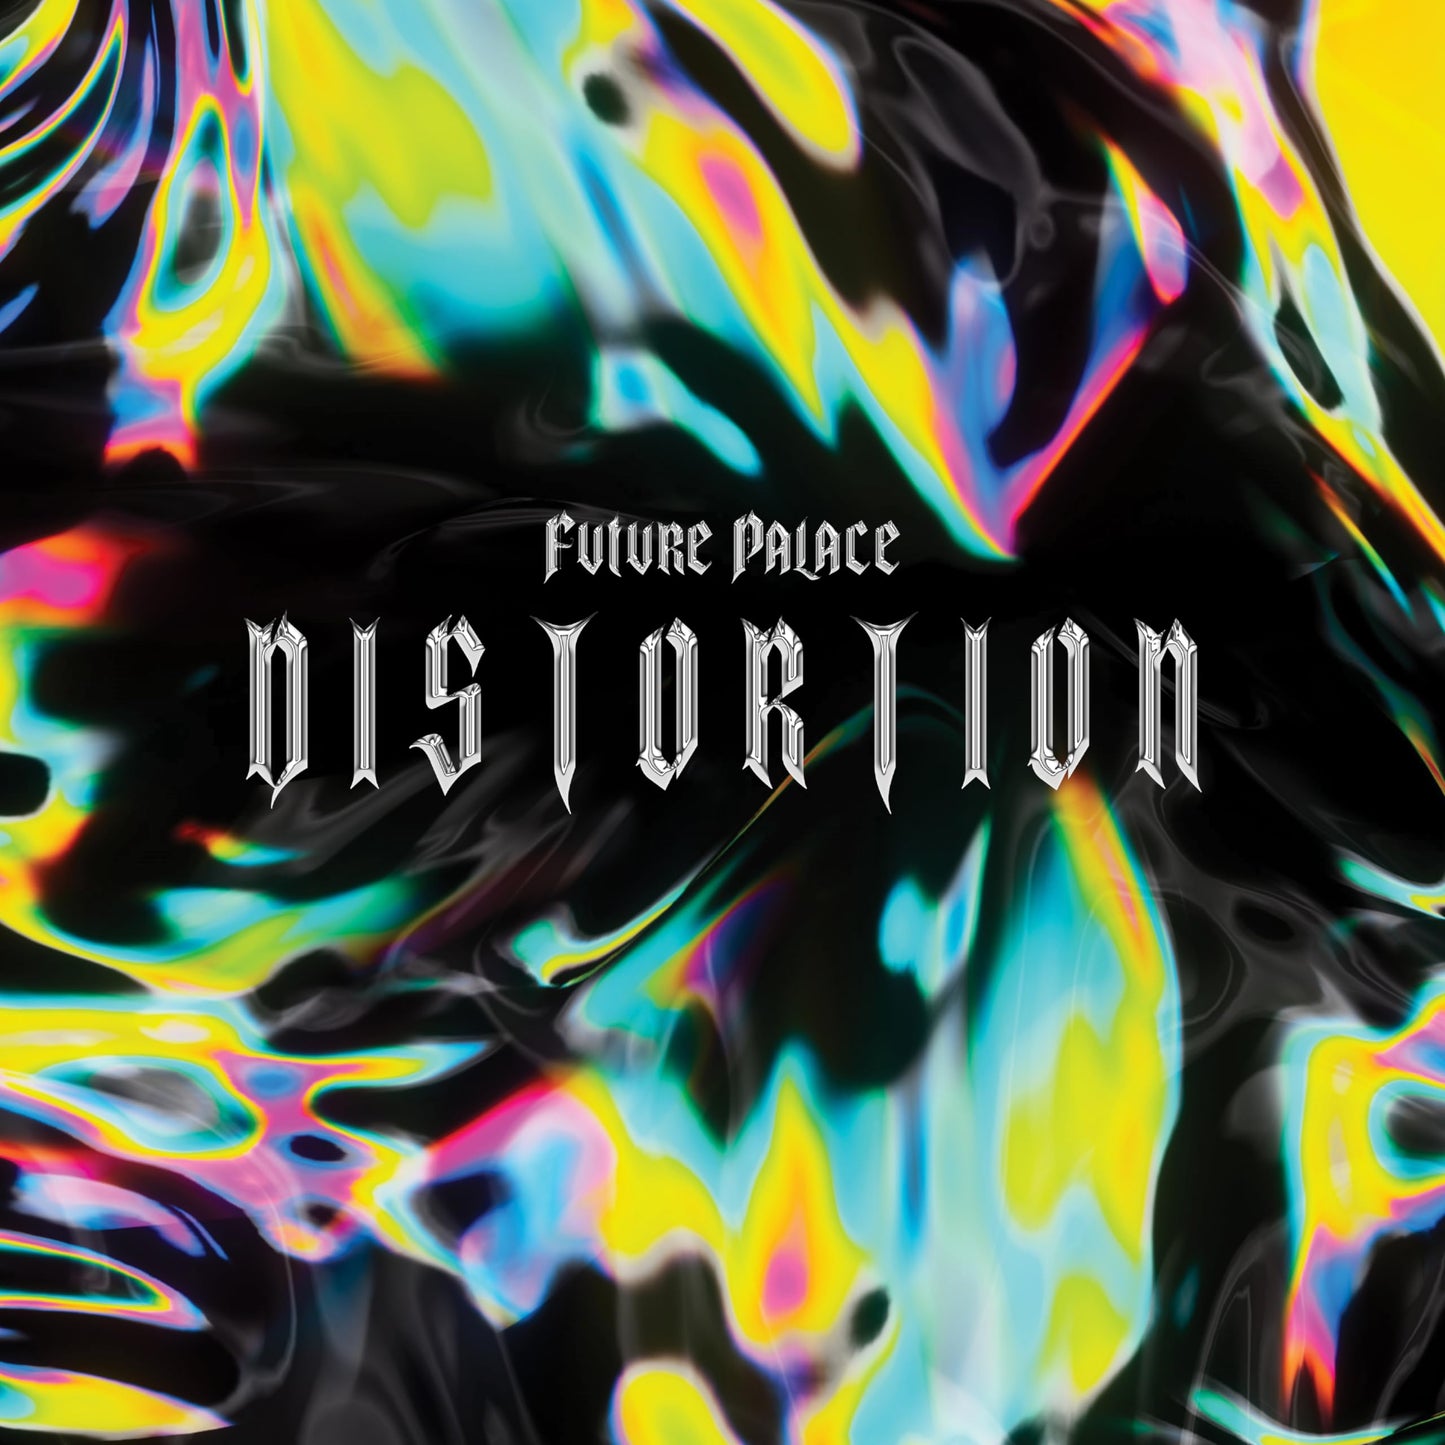 Future Palace - Distortion - Import Neon Pink, Green, Turquoise, Neon Yellow Transparent Twister Vinyl LP Record Limited Edition